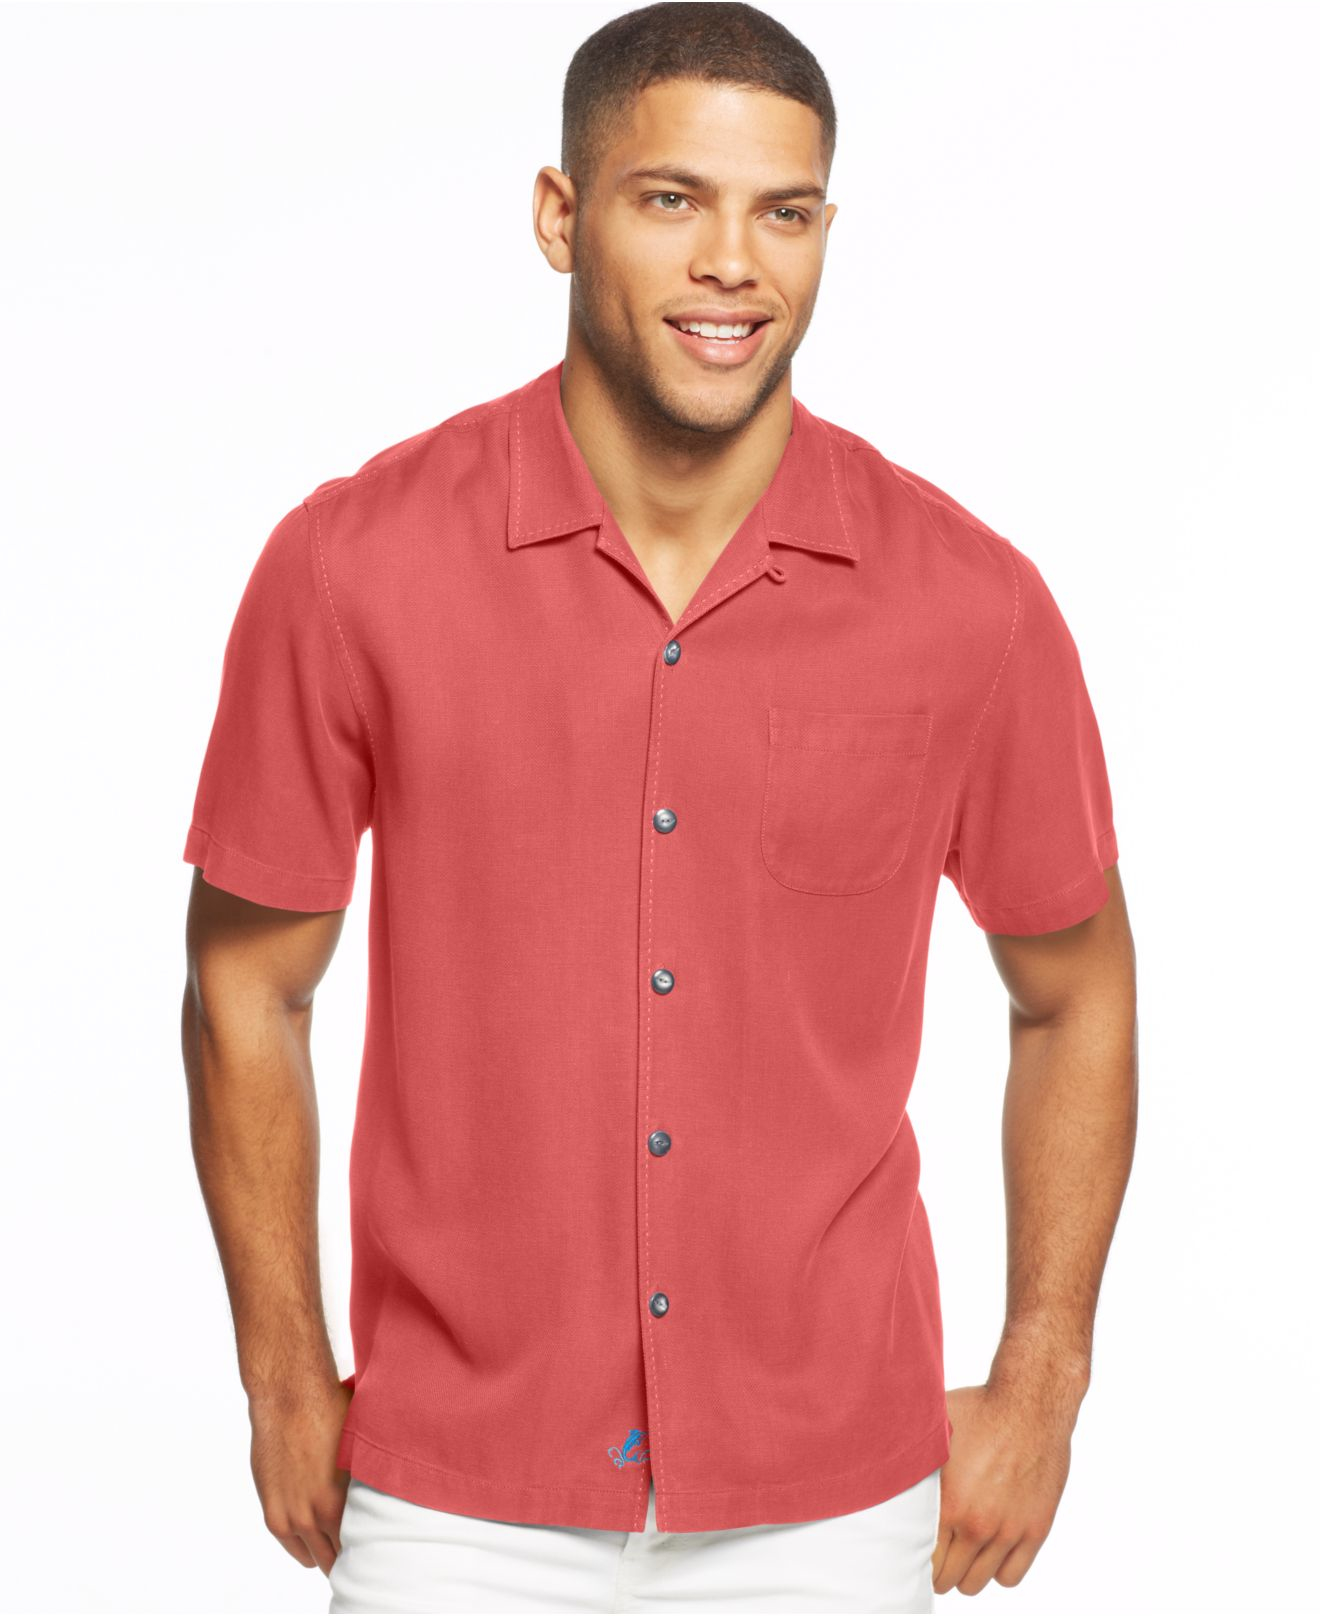 Lyst - Tommy bahama Big And Tall Hamilton Stitched Silk Shirt in Blue ...